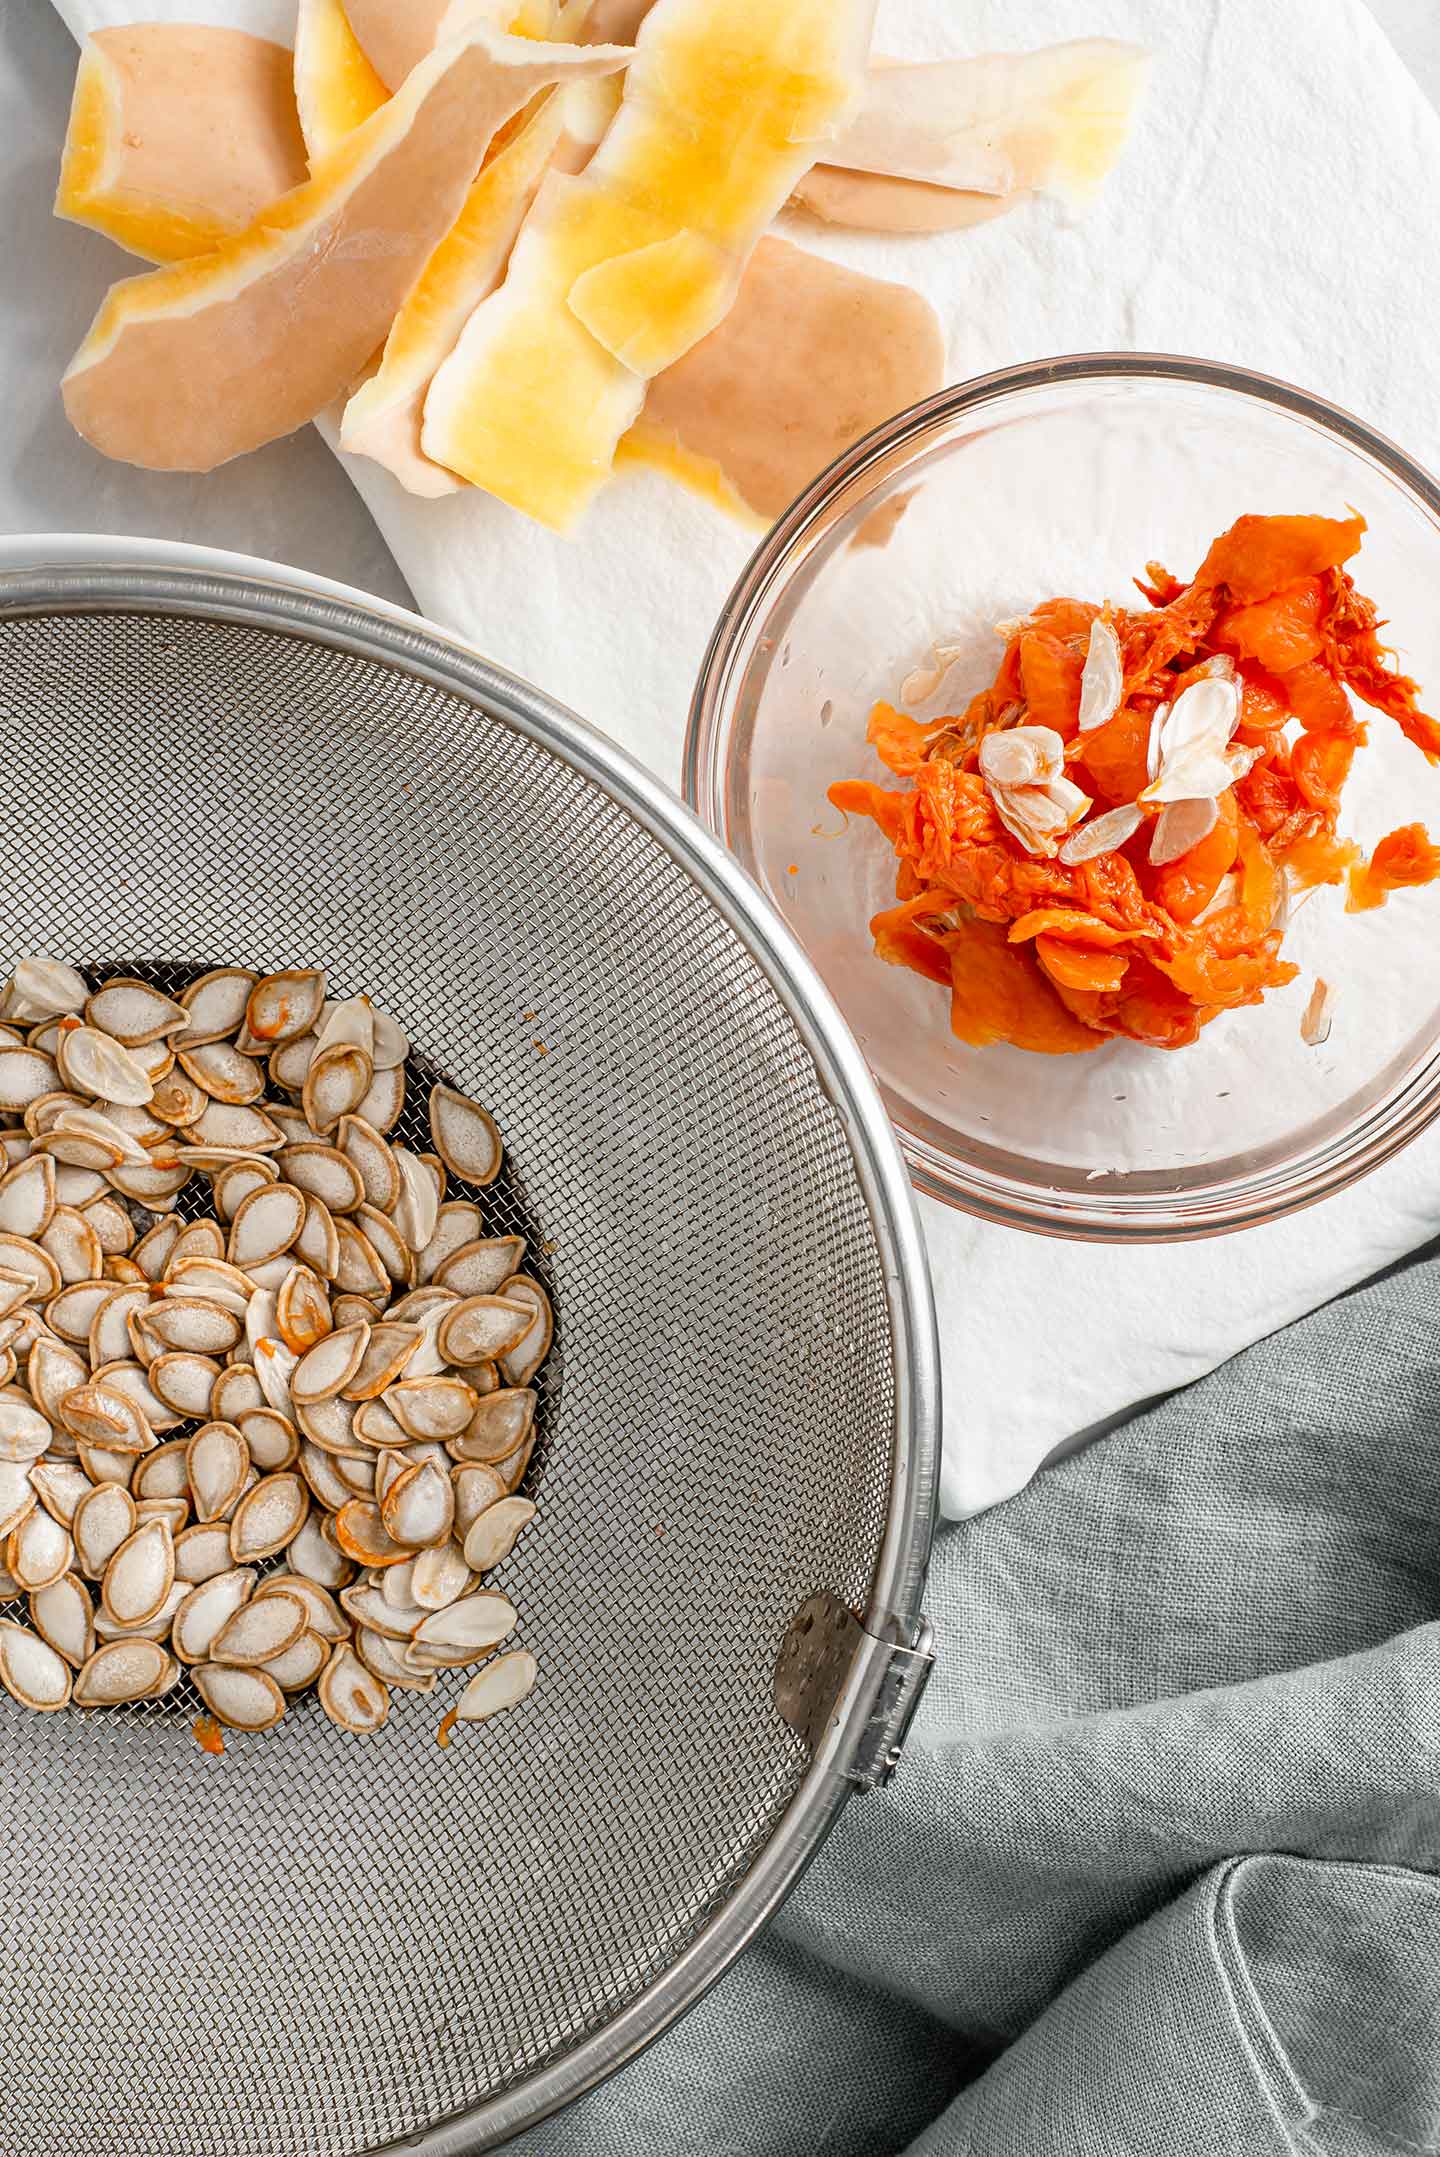 Butternut squash seeds are in a sieve with the stringy membrane in a separate small bowl. Slices of squash peel lay next to the seeds on a white tray.